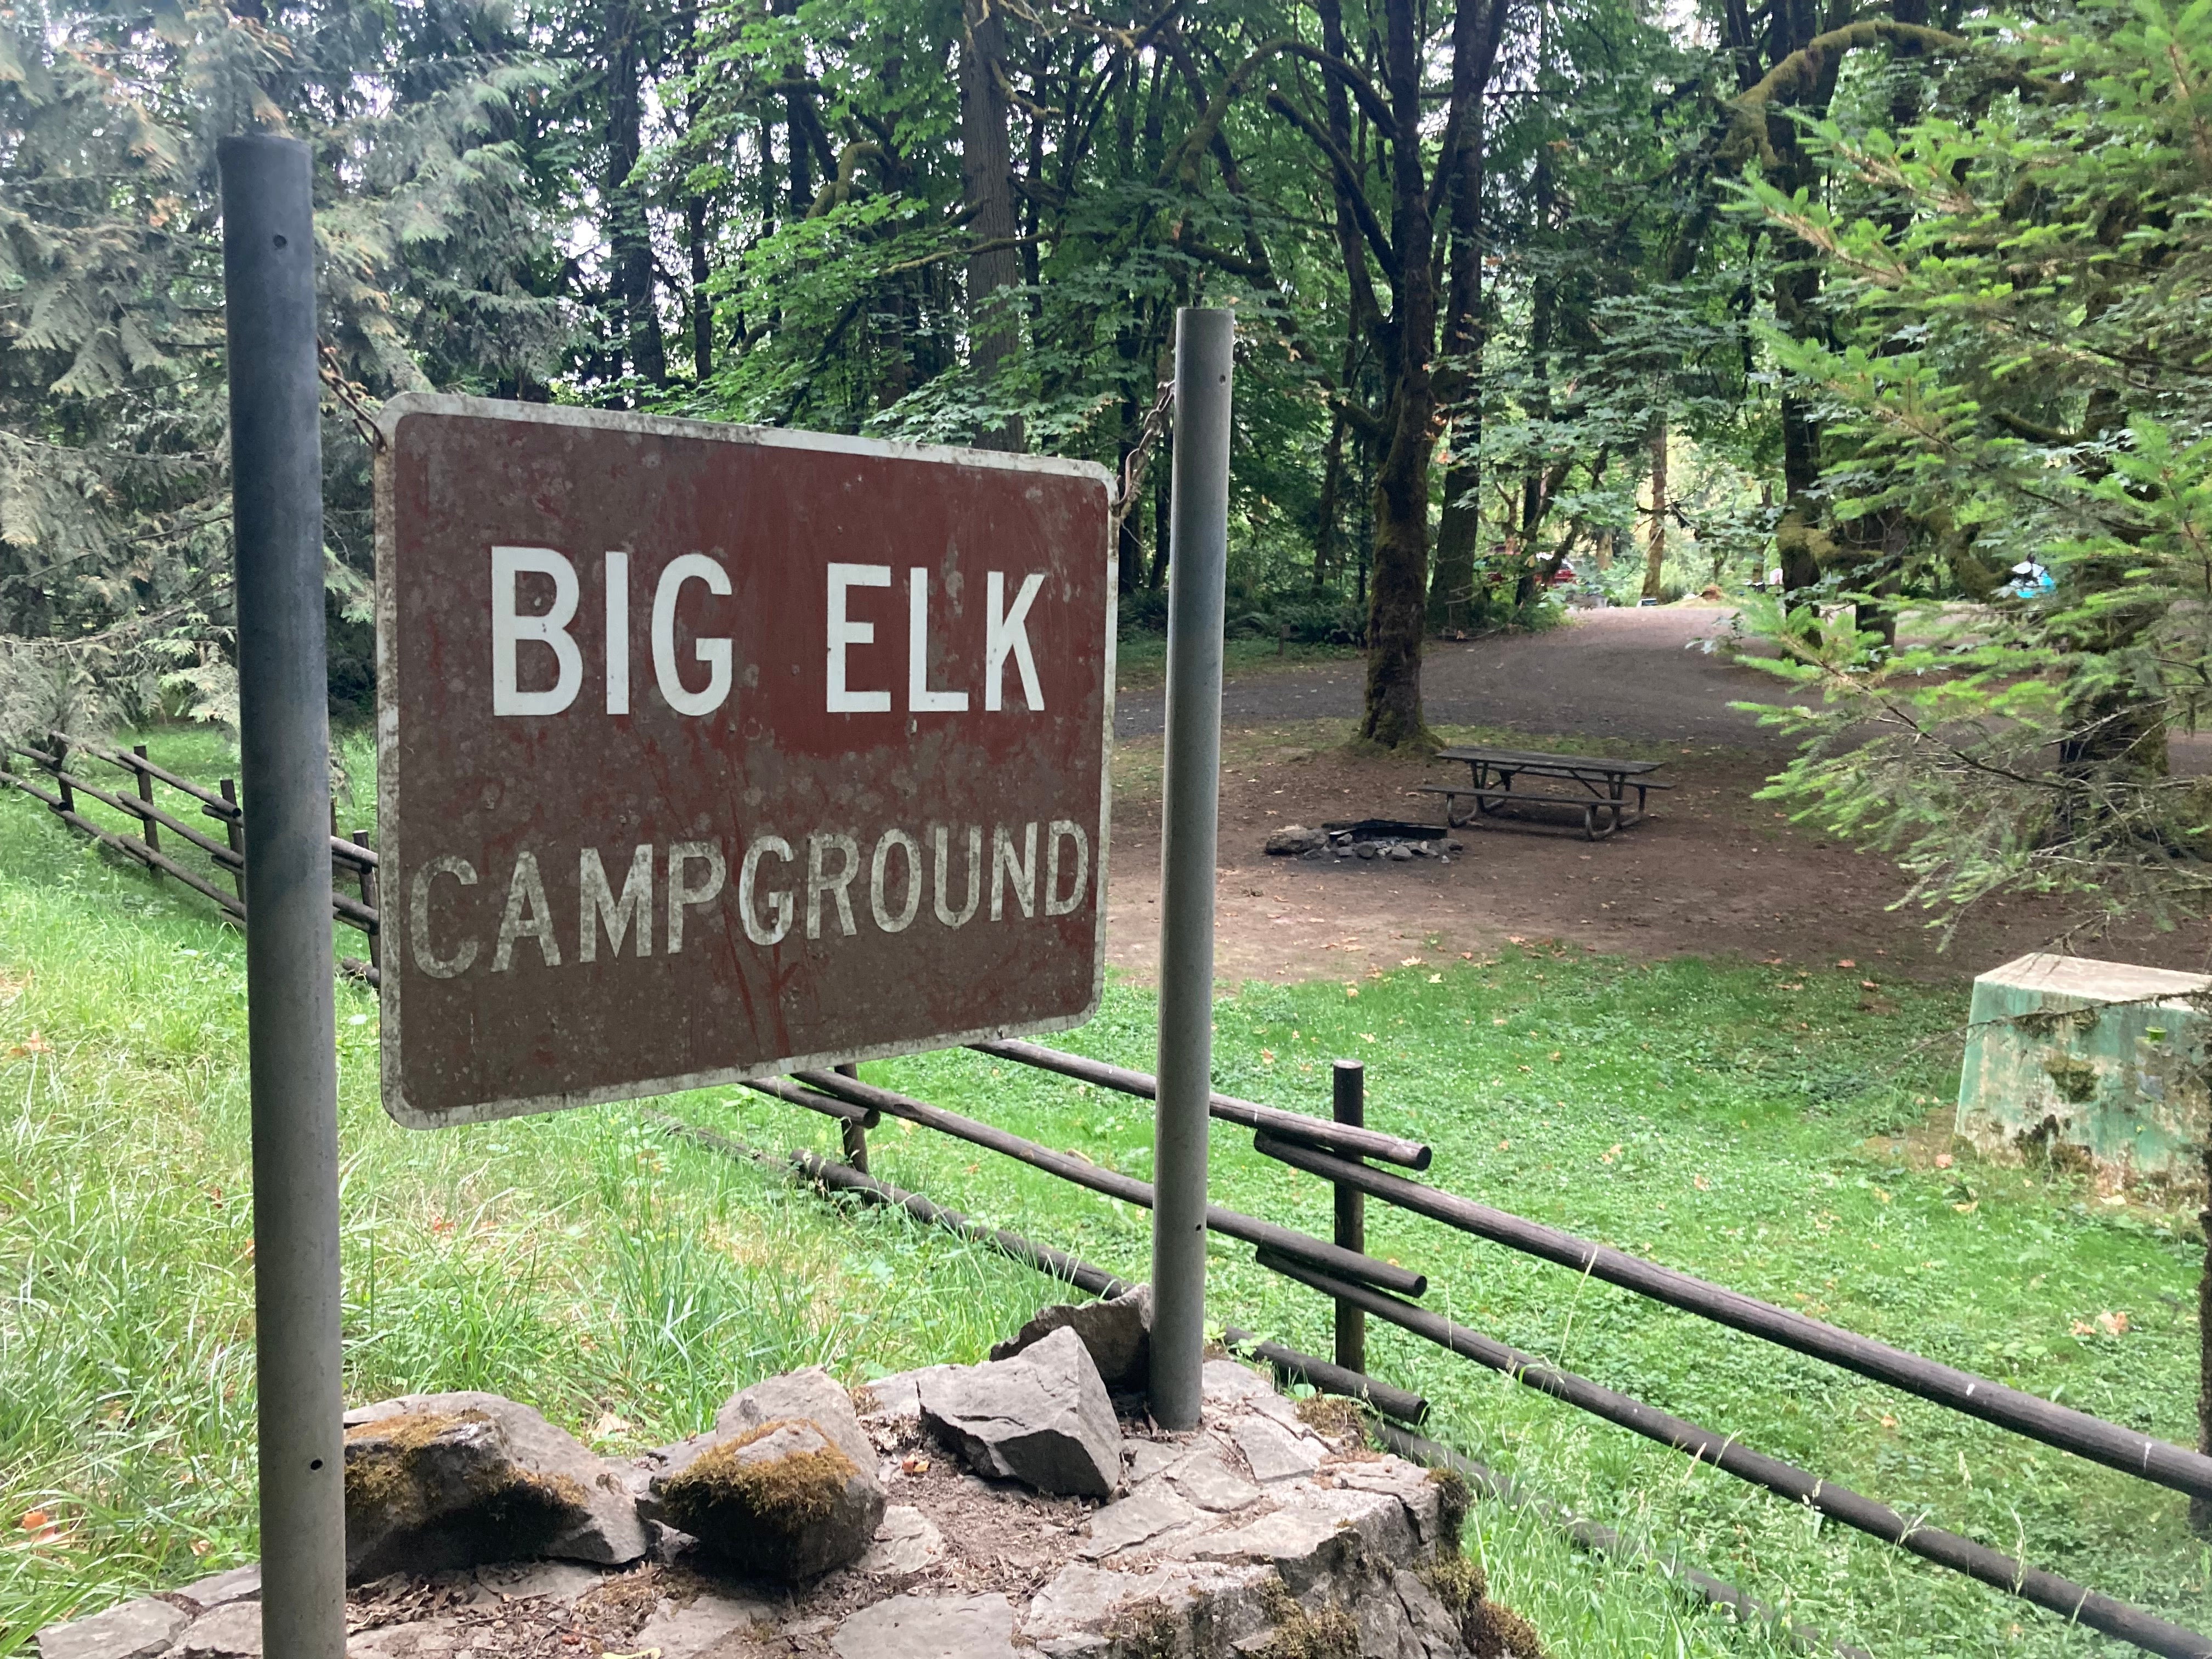 Camper submitted image from Big Elk Campground - 1